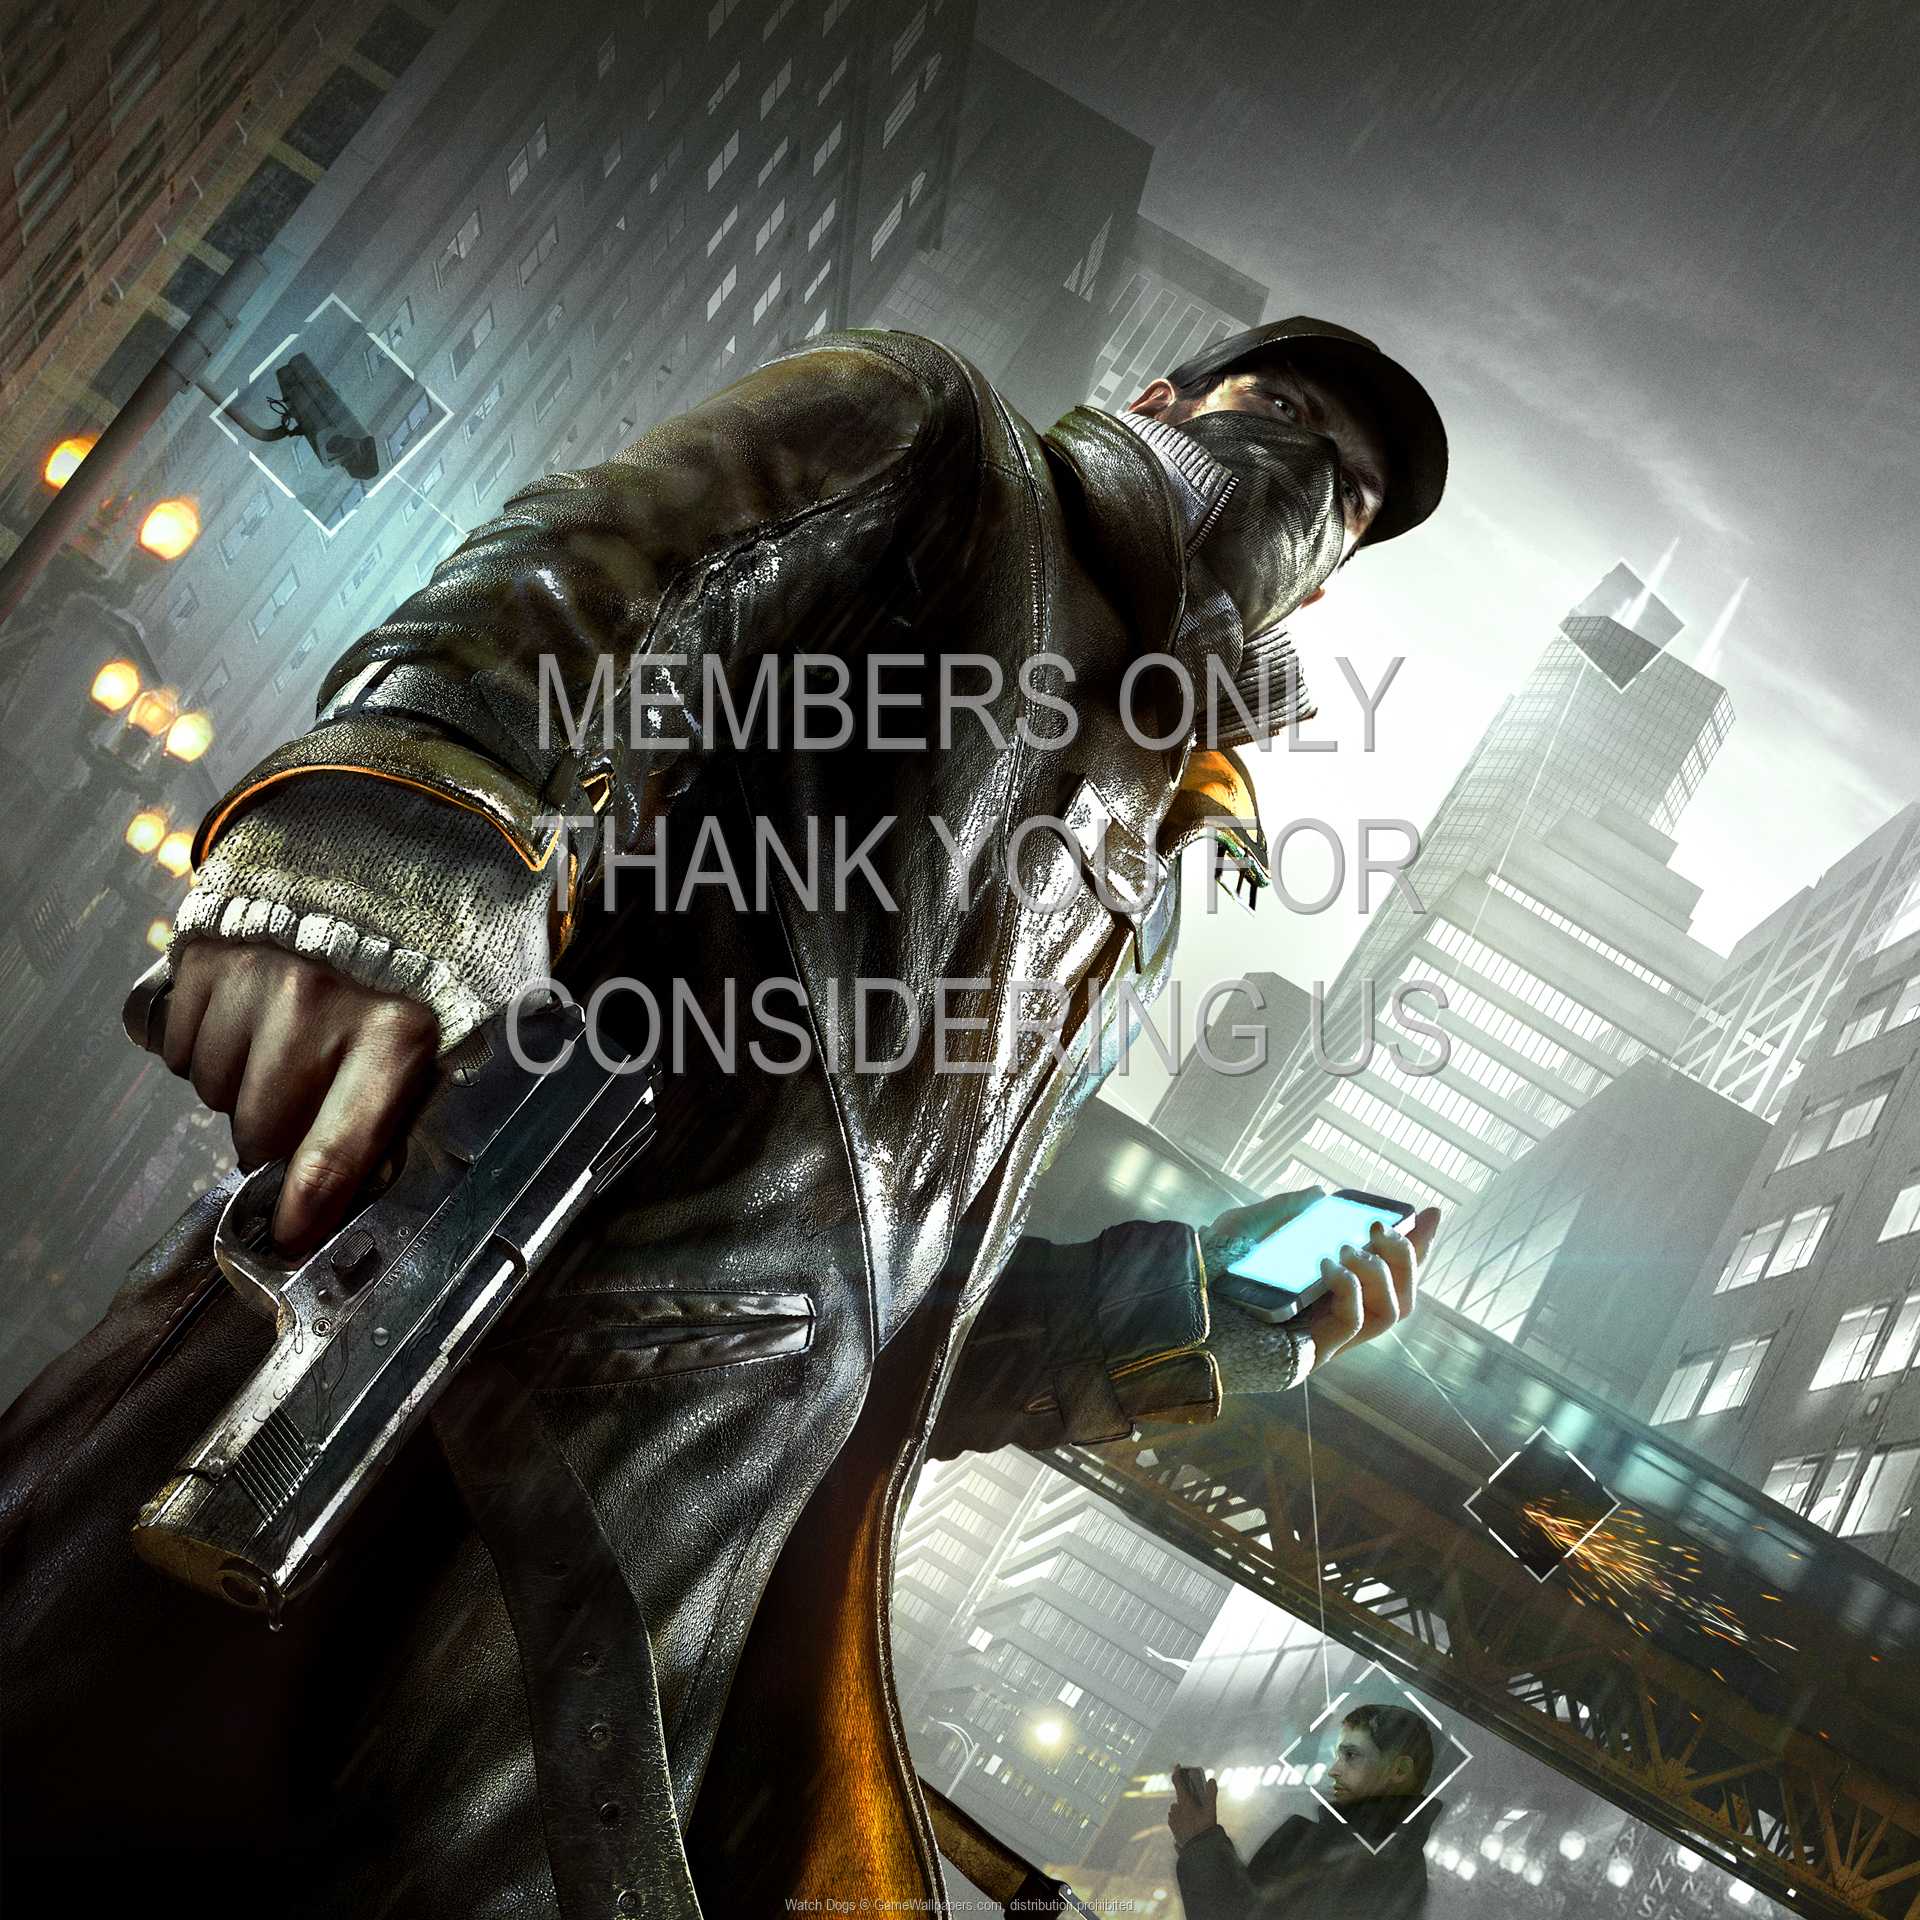 Watch Dogs 1080p%20Horizontal Mobile wallpaper or background 02